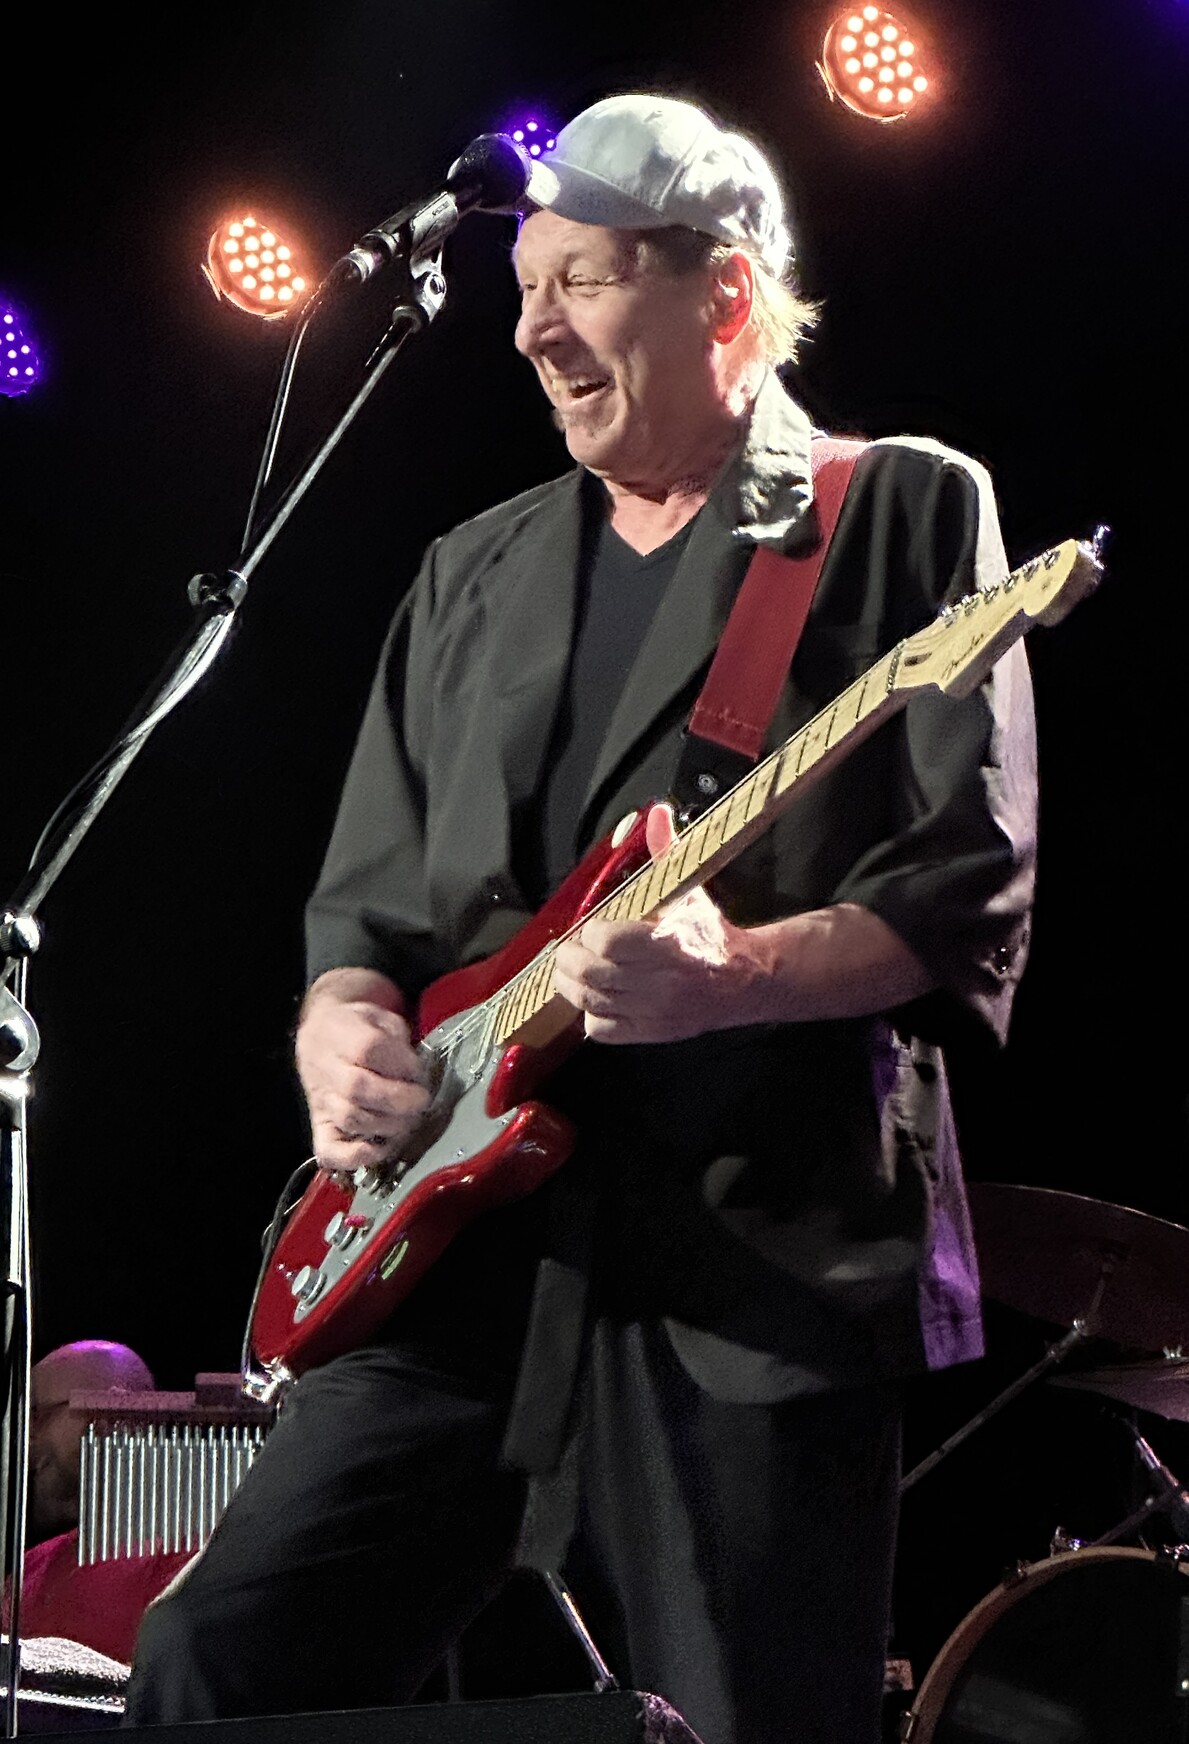 Adrian Belew on stage smiling and playing a red guitar